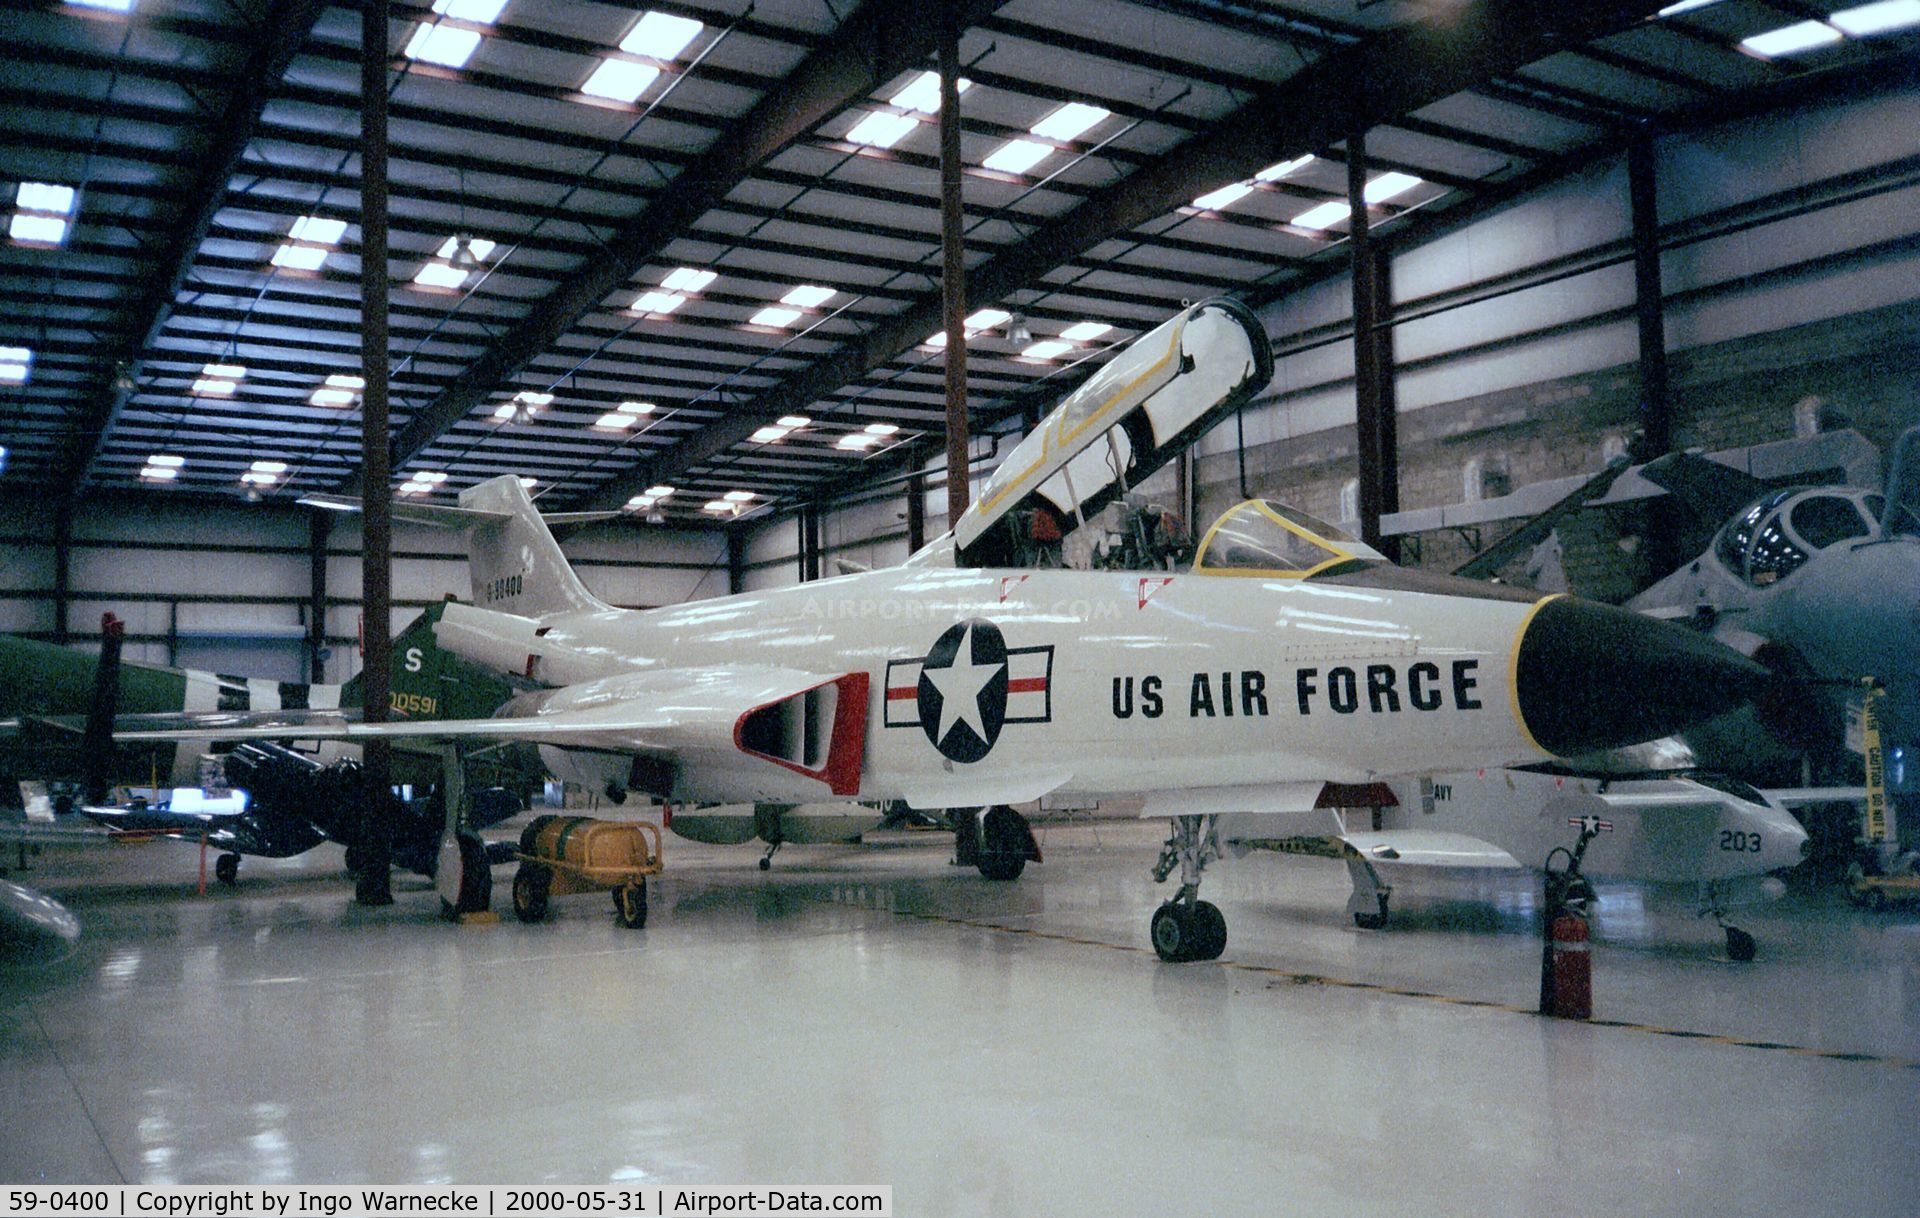 59-0400, 1959 McDonnell F-101F Voodoo C/N 724, McDonnell F-101F Voodoo at the Valiant Air Command Warbird Museum, Titusville FL